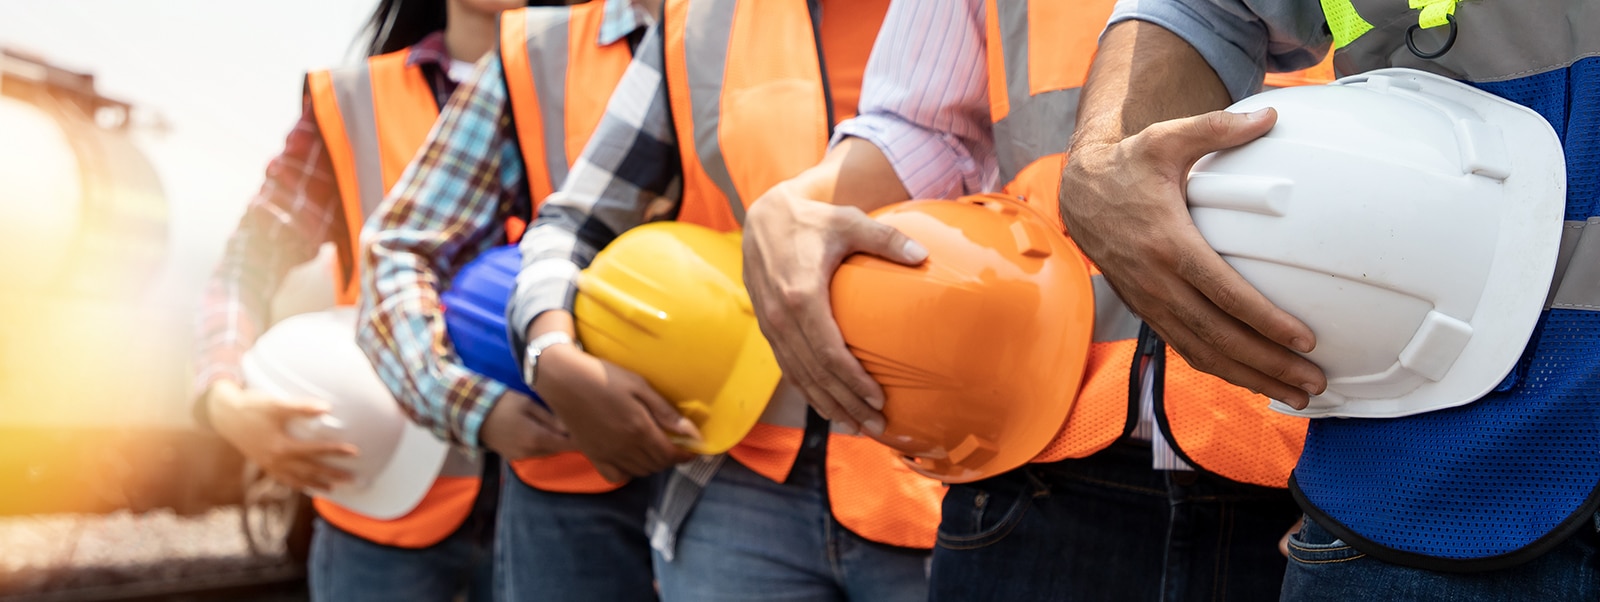 Construction Accidents Lawyers Boston